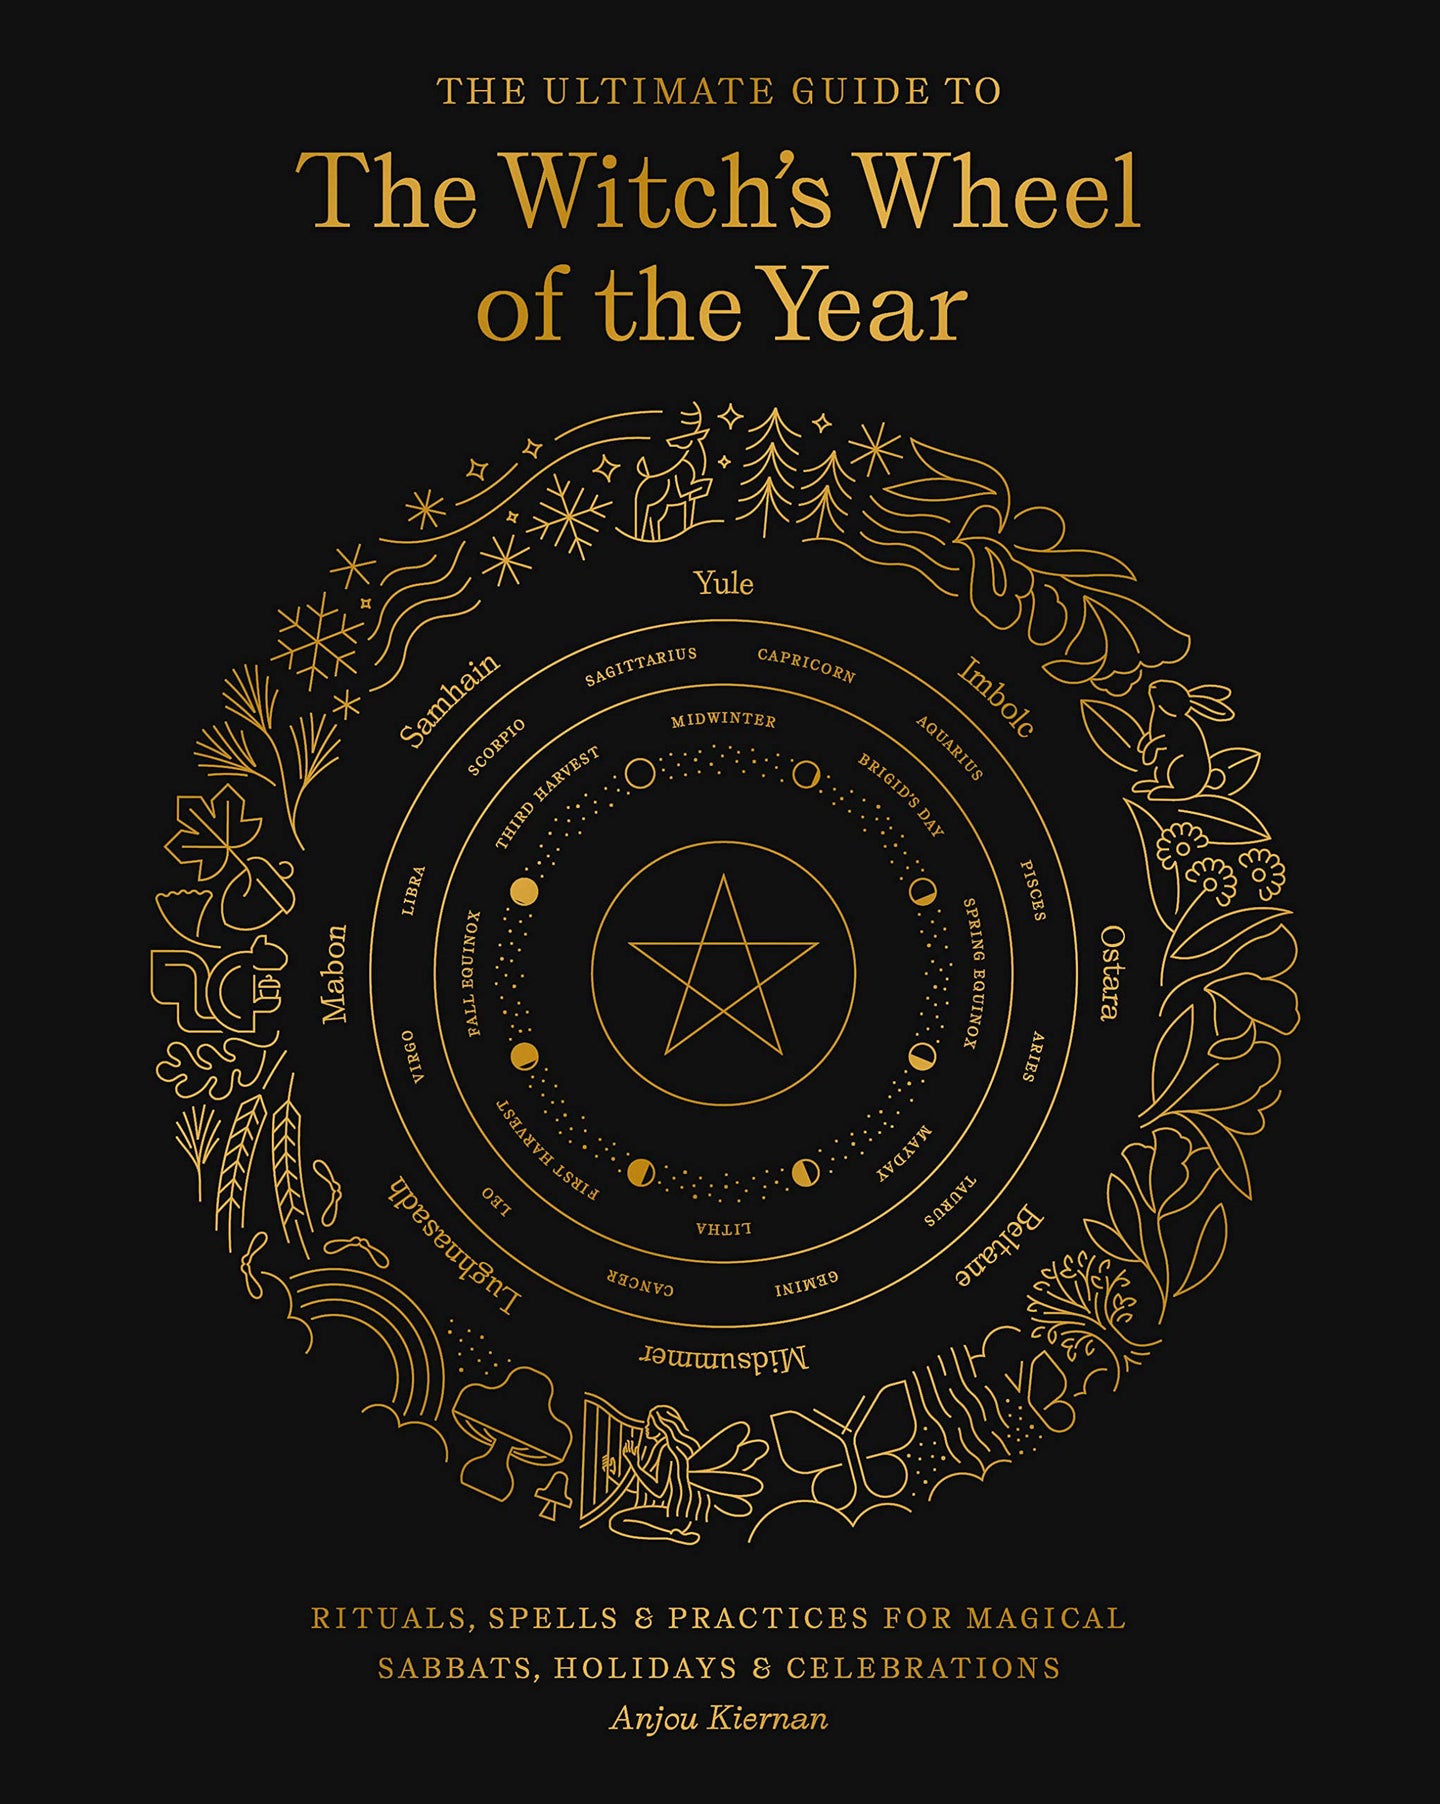 The Witch's Wheel of the Year